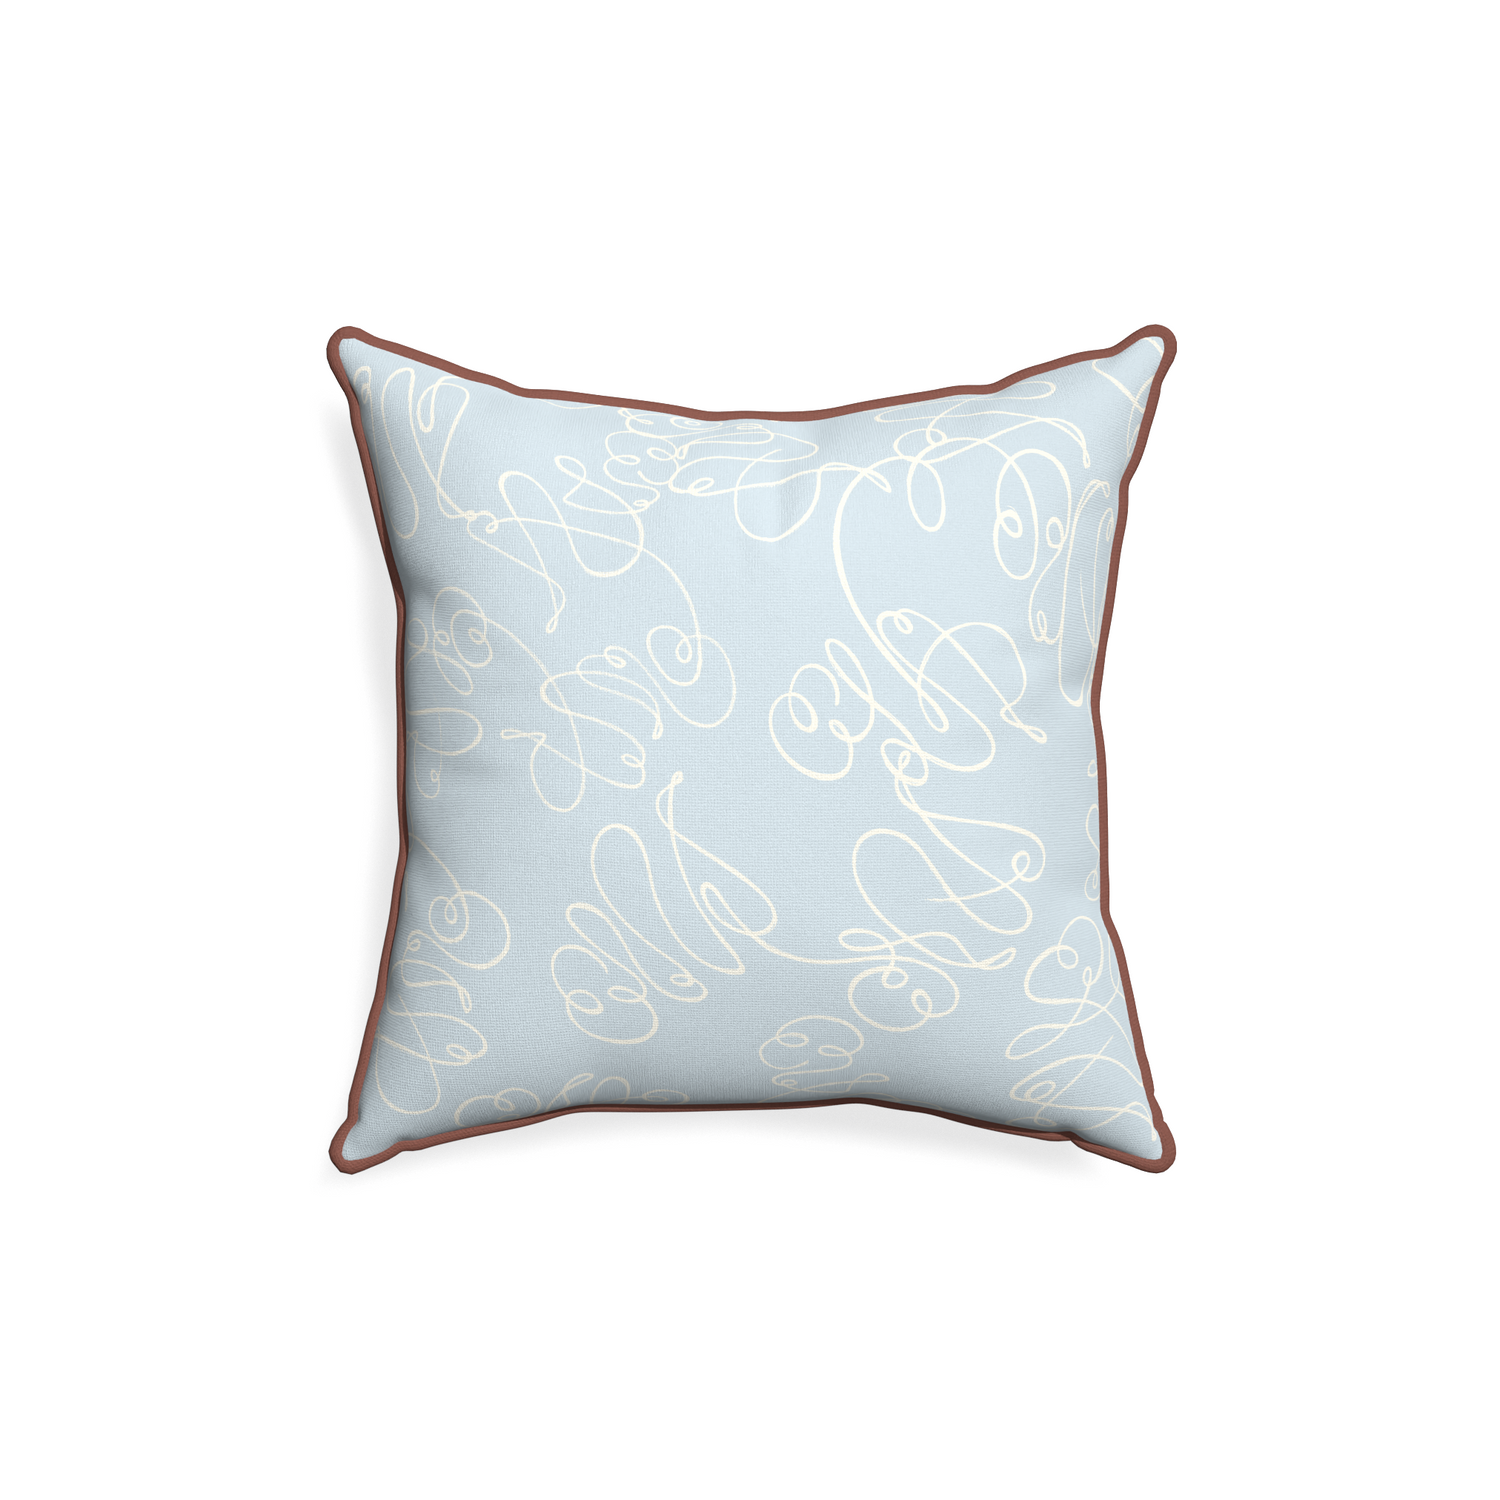 18-square mirabella custom pillow with w piping on white background